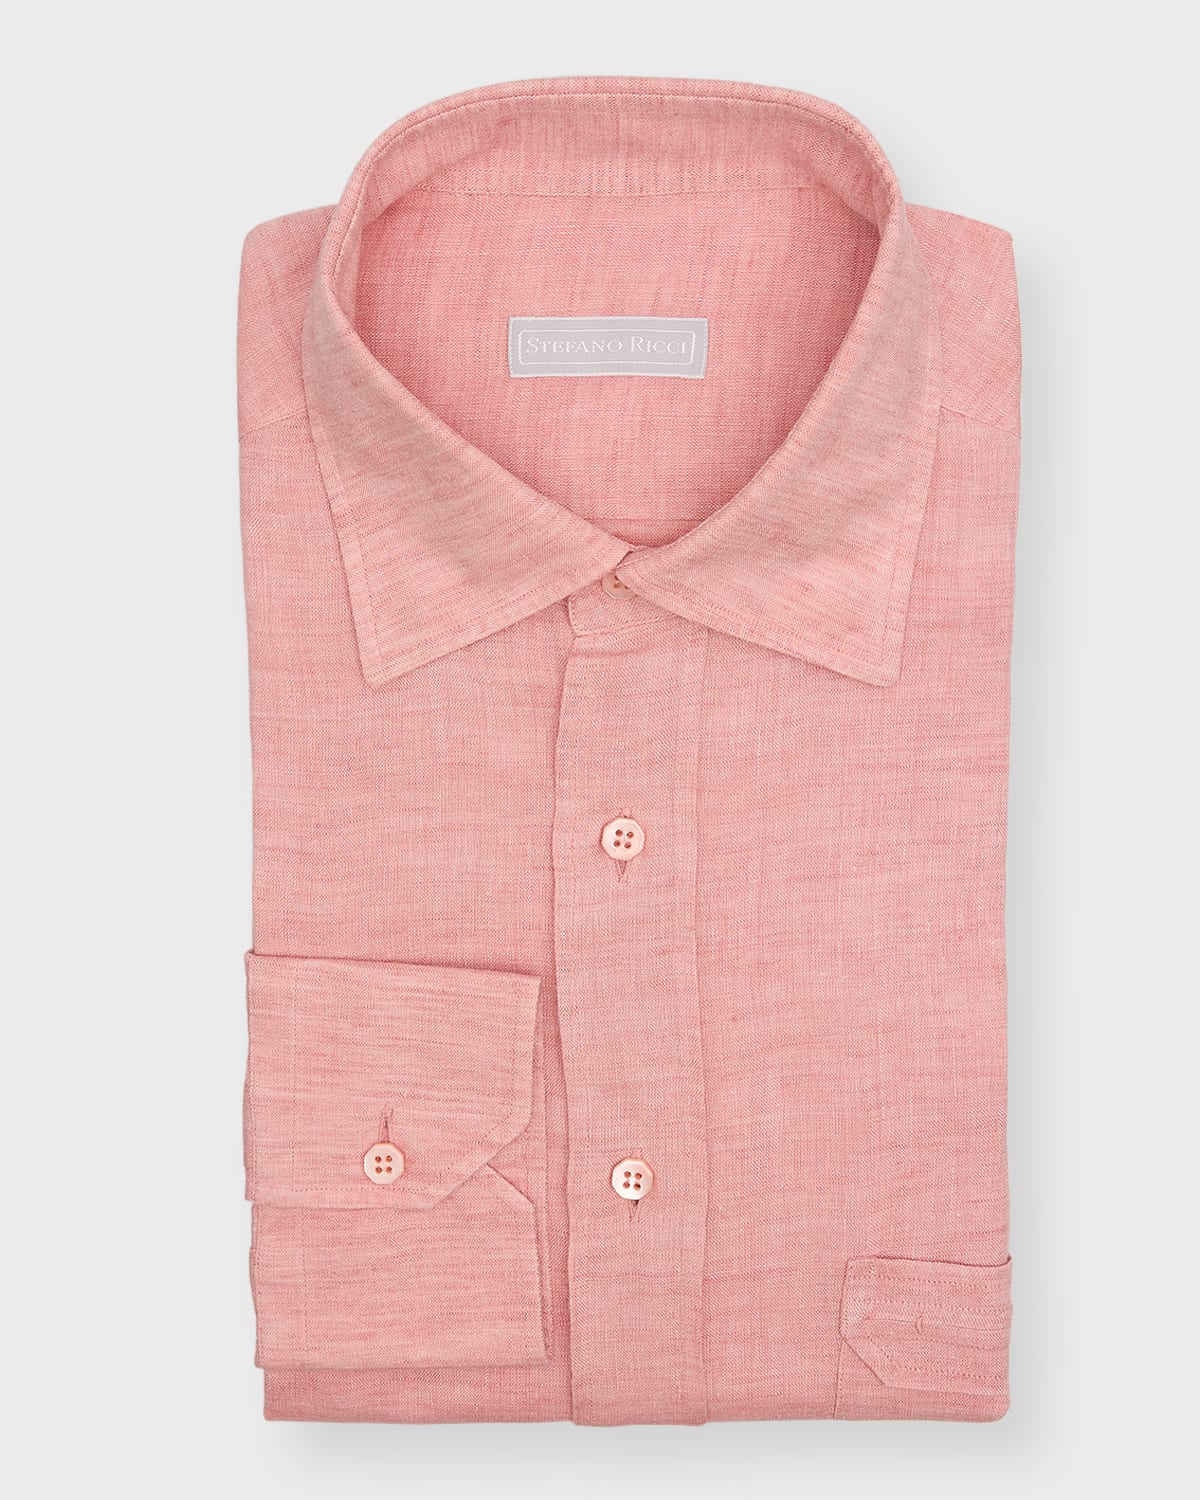 Stefano Ricci Men's Linen Sport Shirt With Pocket In Pink